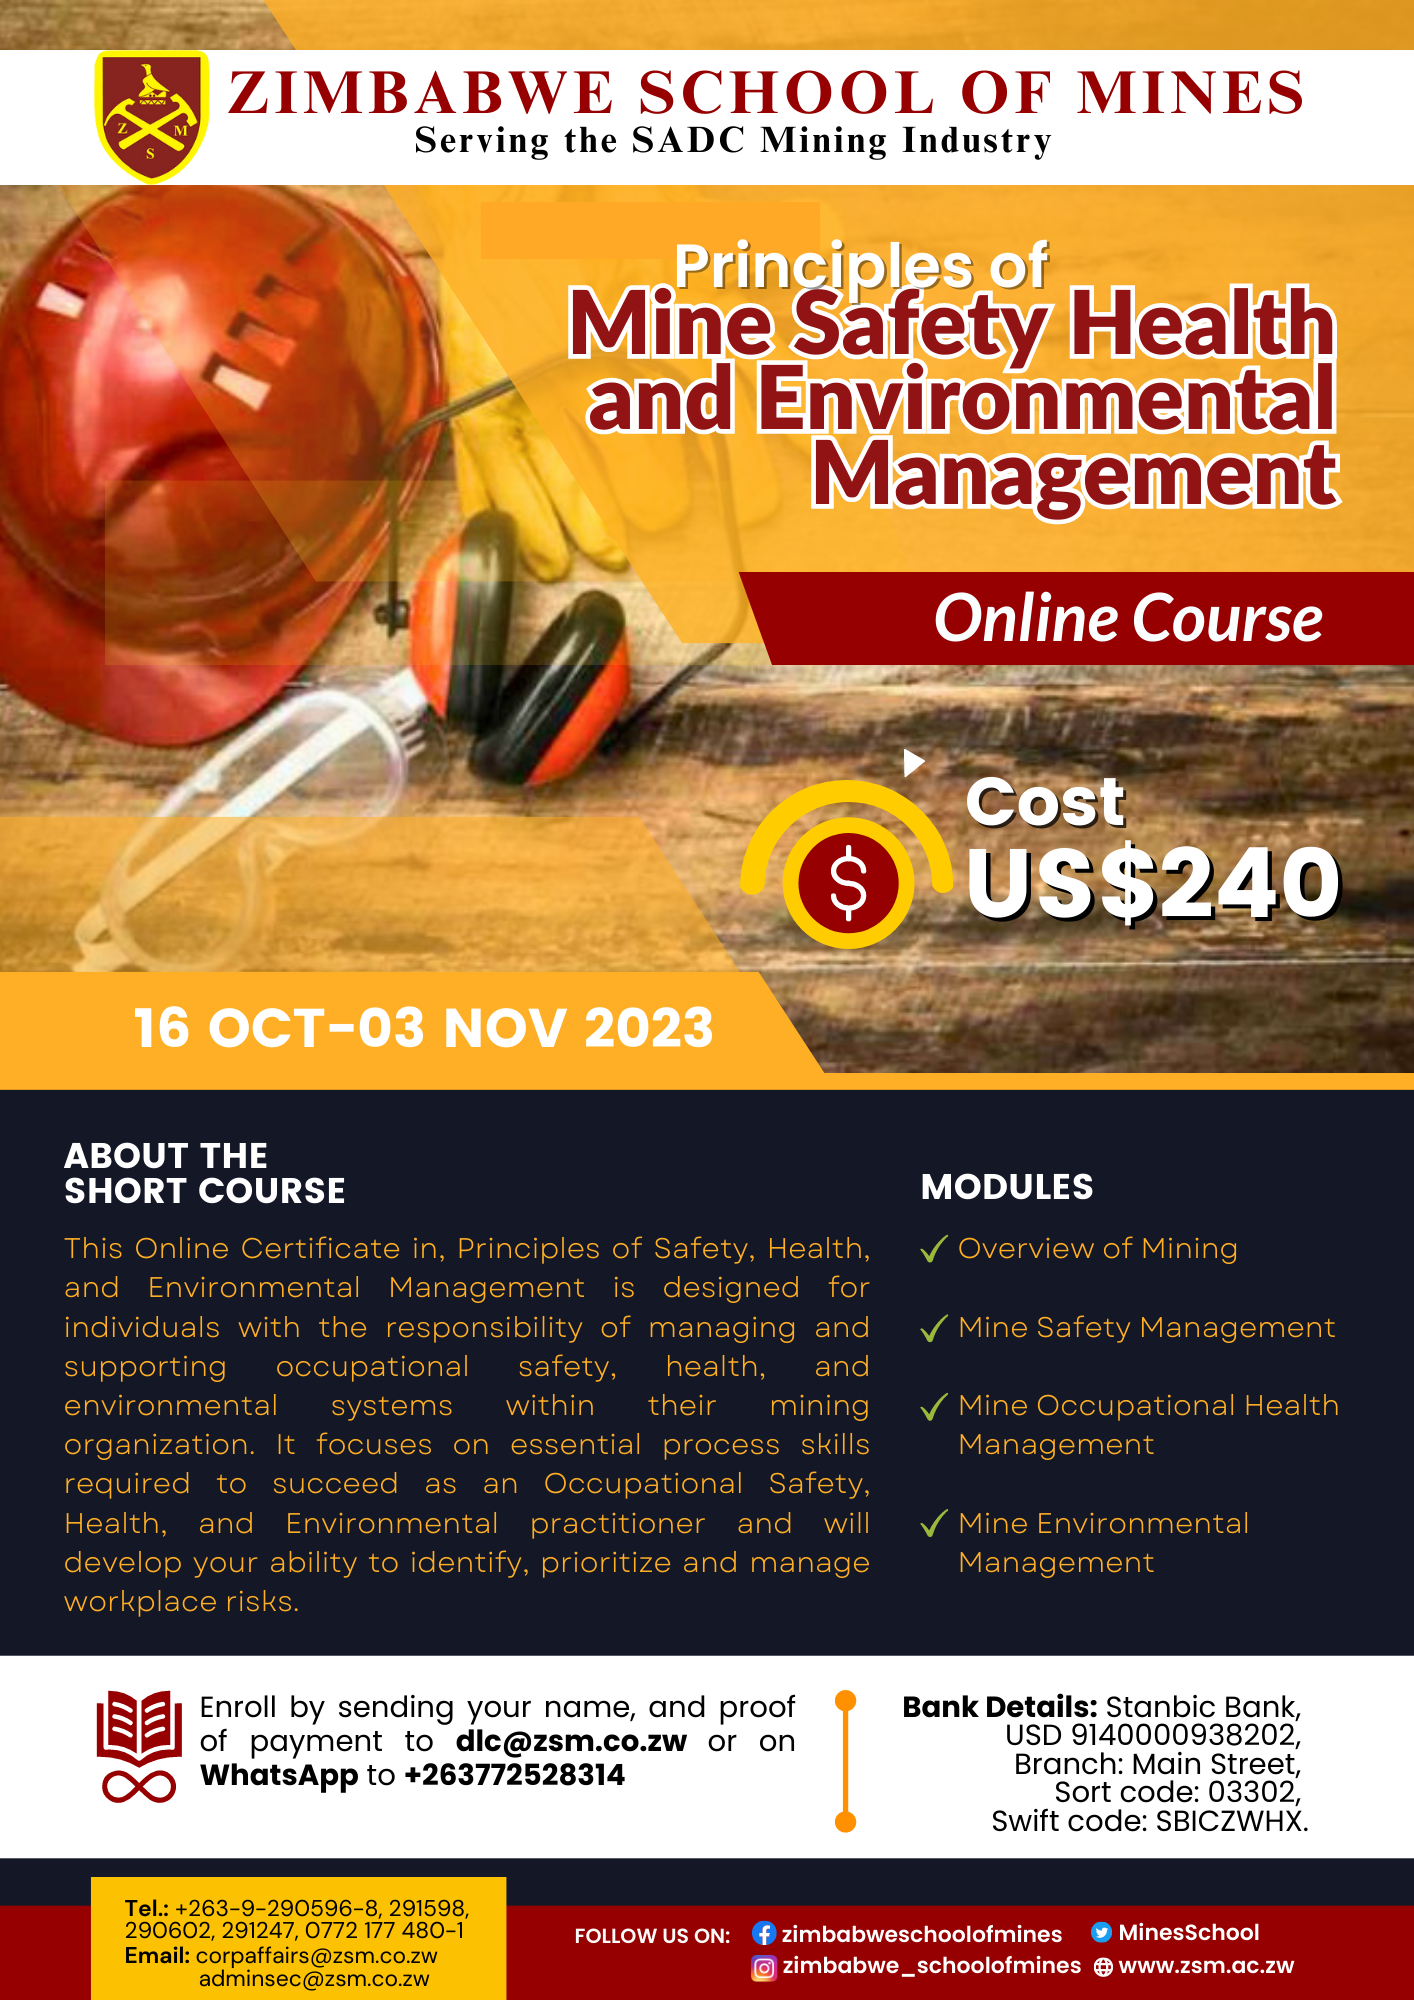 Online Course Principles of Mine Safety Health and Environmental Management